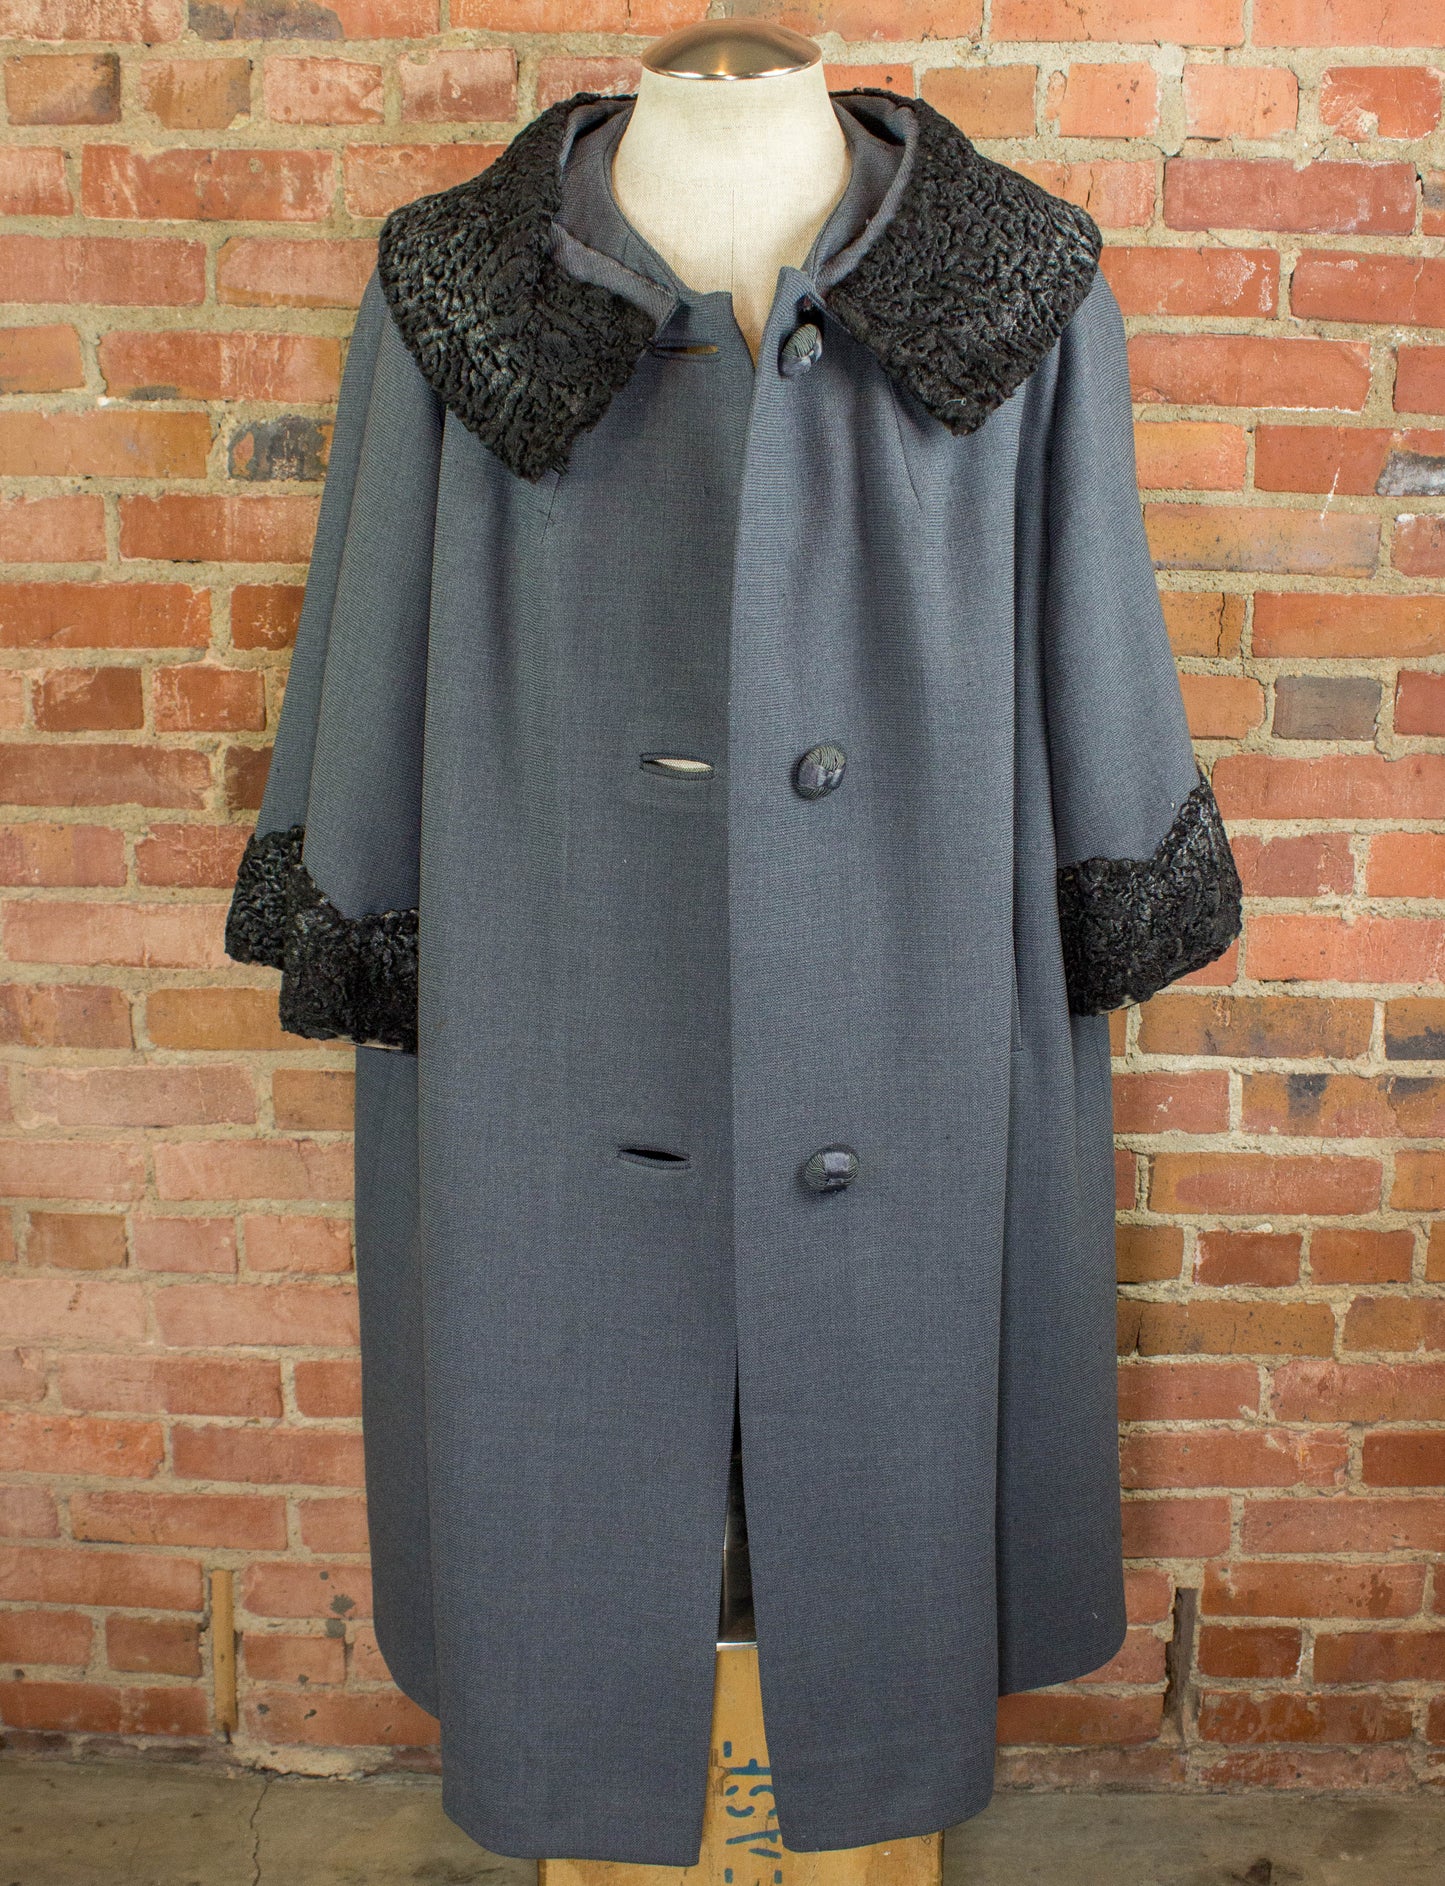 Vintage 50s Women's Overcoat With Black Shearling Collar and Cuffs Size Medium-Large